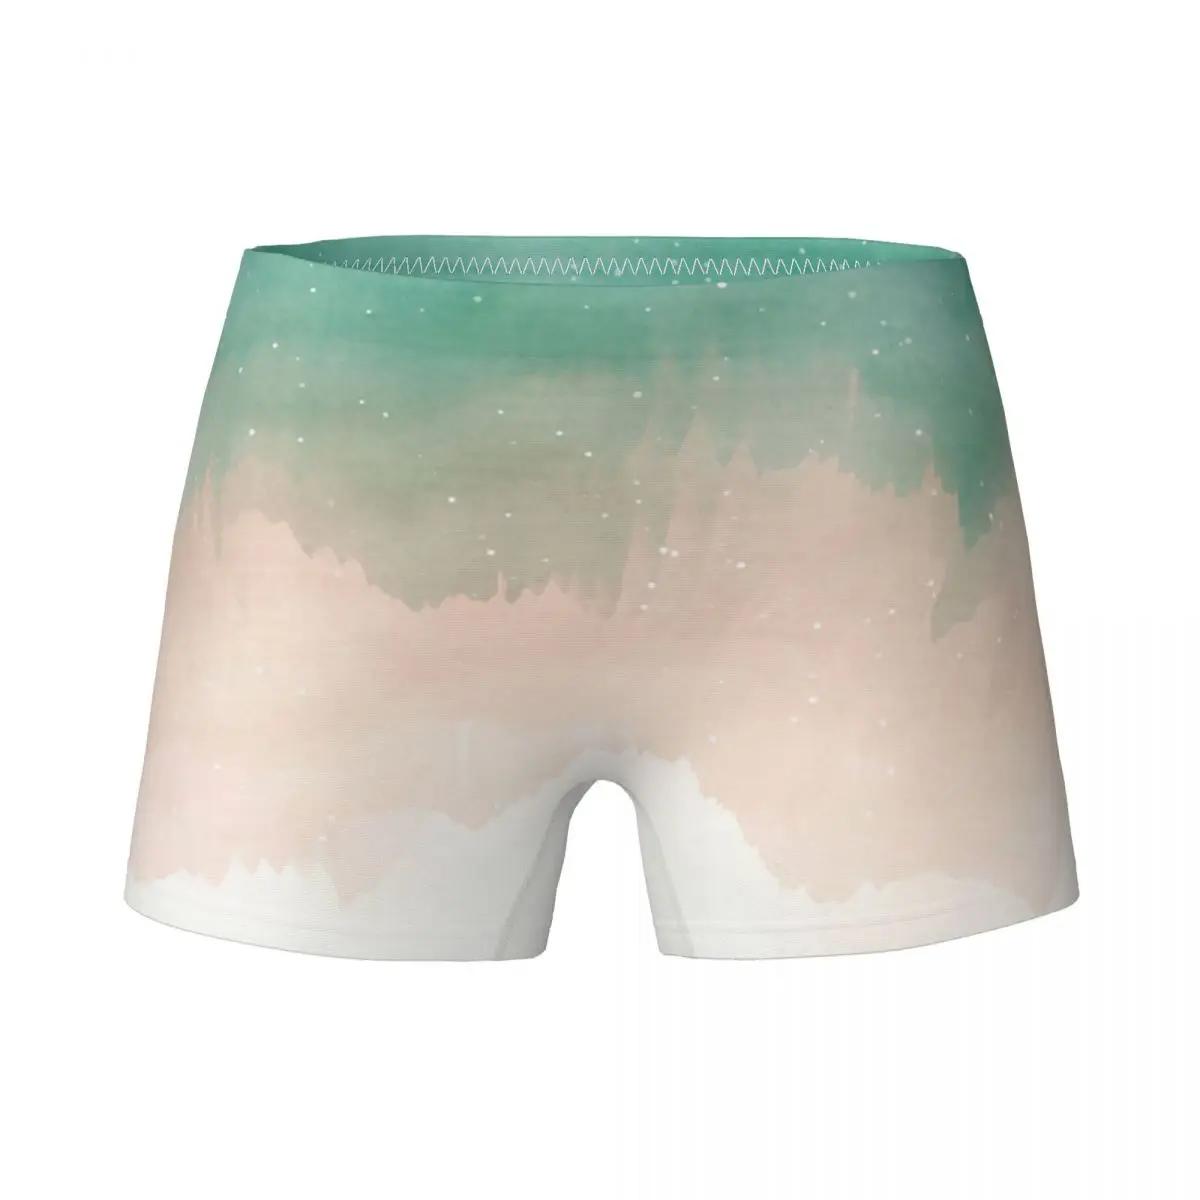 Young Girls Watercolor Colorful Boxers Childrens Cotton Underwear Kids Teenagers Underpants Briefs 4-15Y